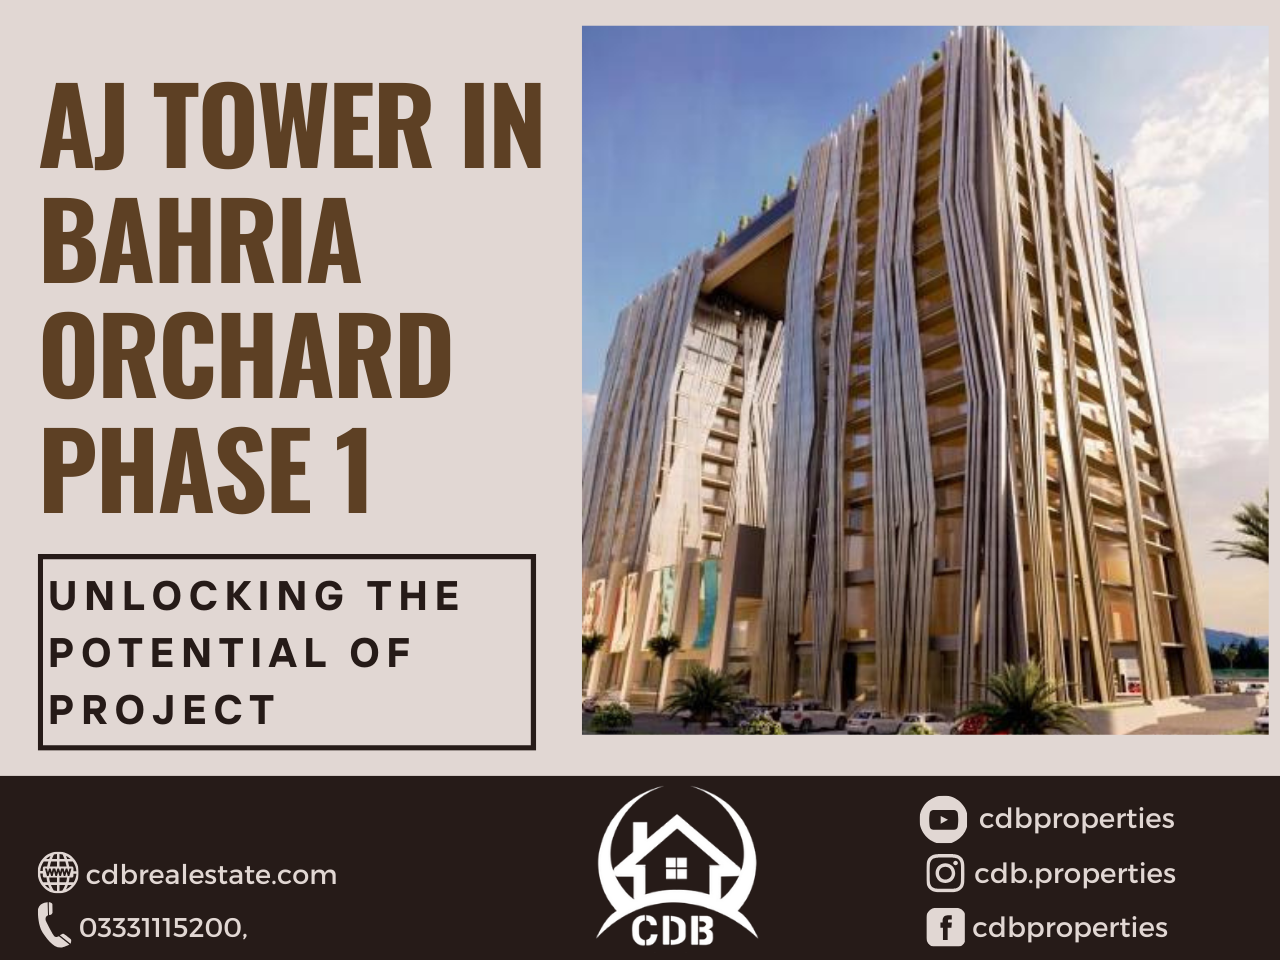 AJ Tower in Bahria Orchard Phase 1: Unlocking the Potential of Project